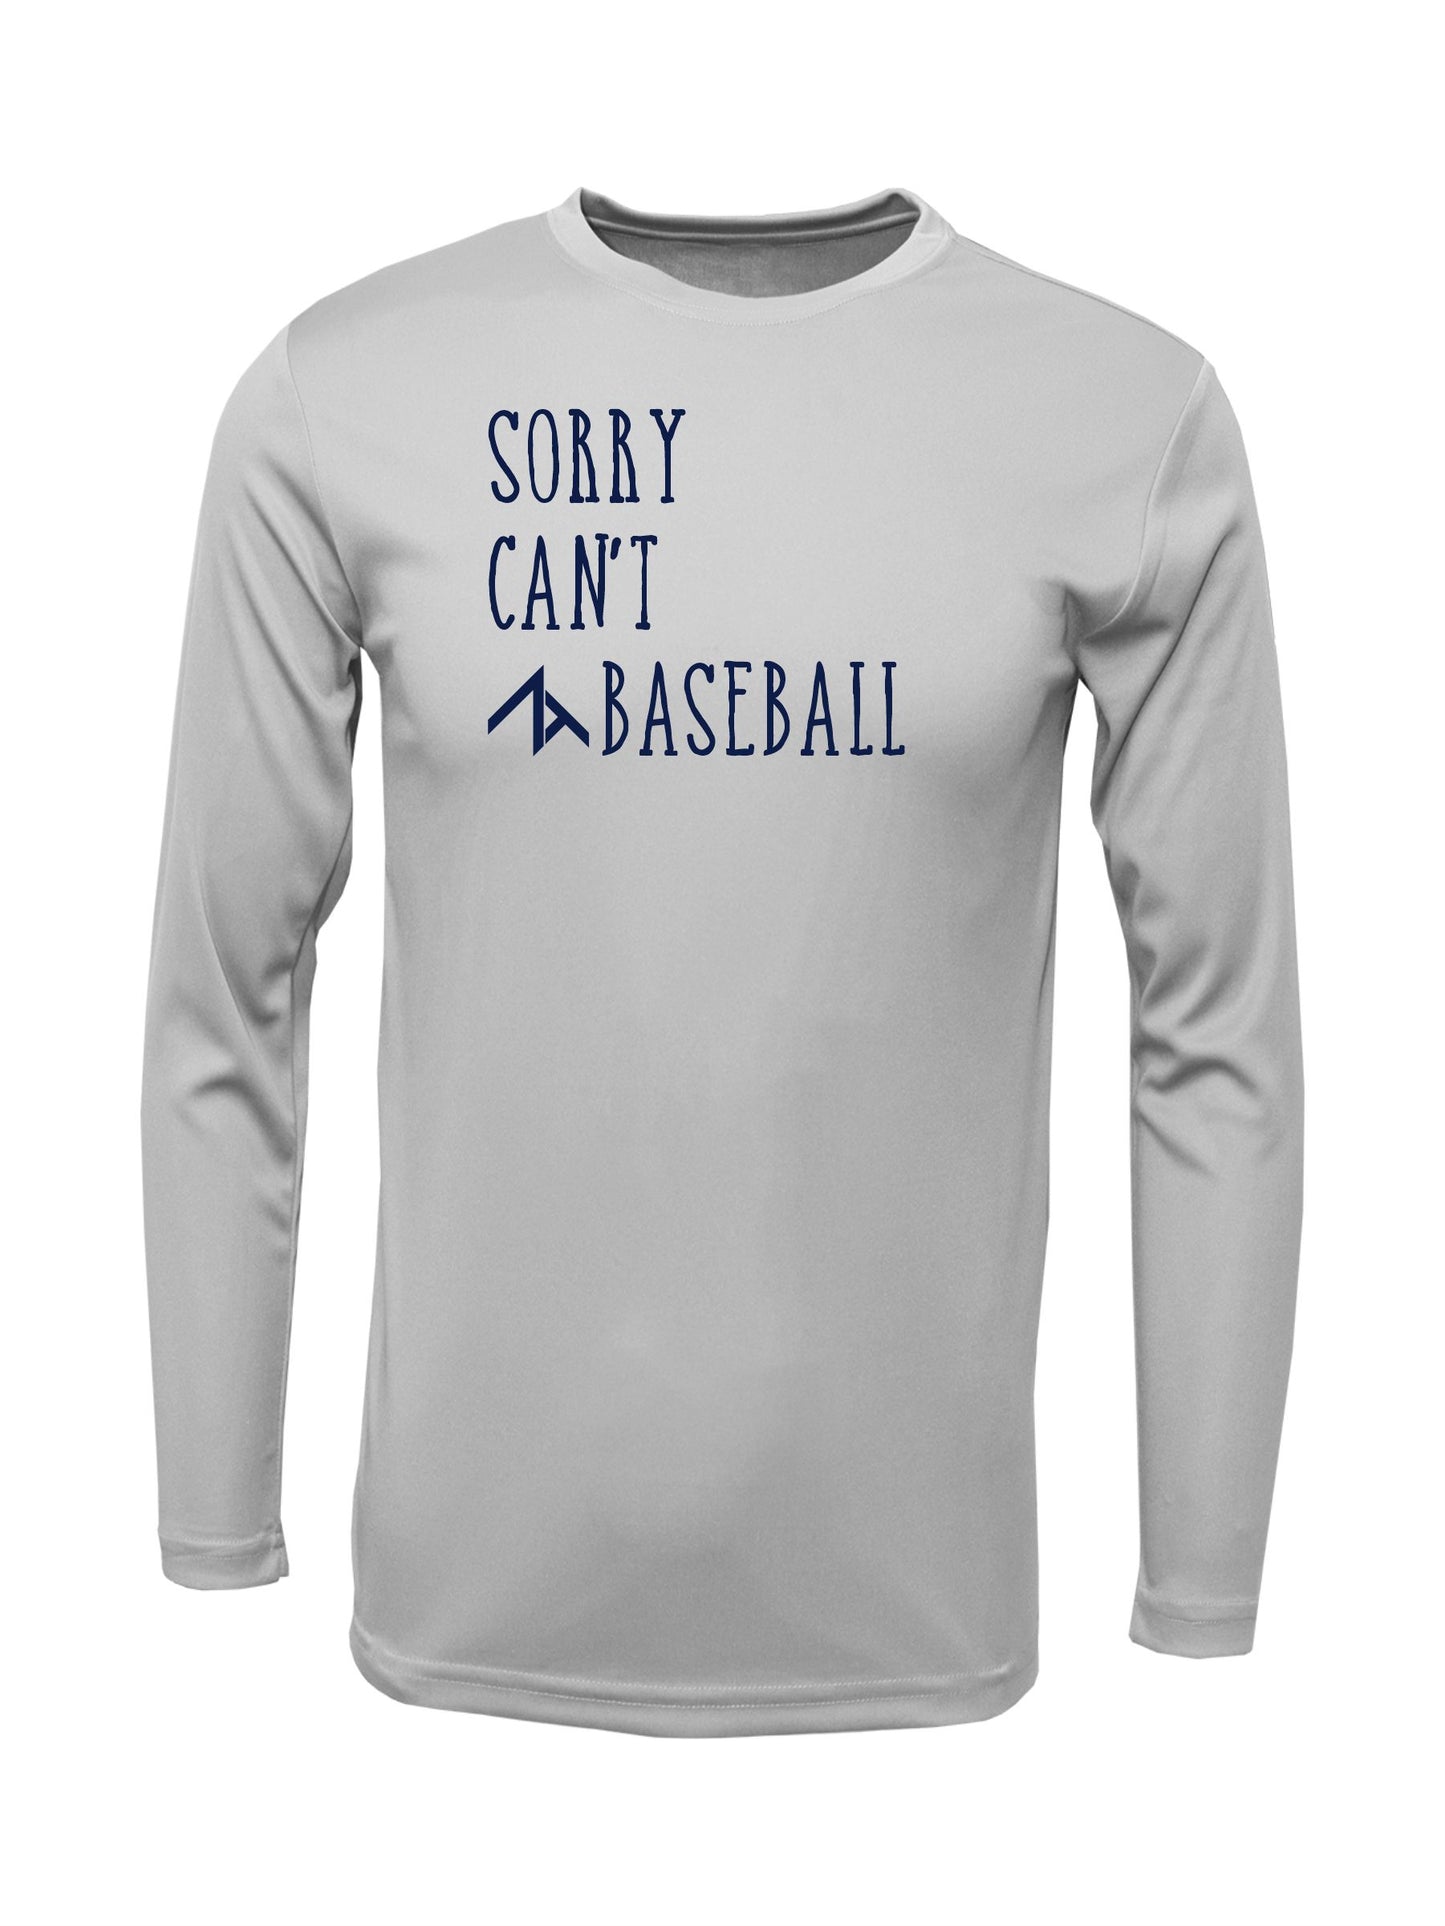 Long Sleeve "SORRY CAN'T" Dri-Fit T-shirt